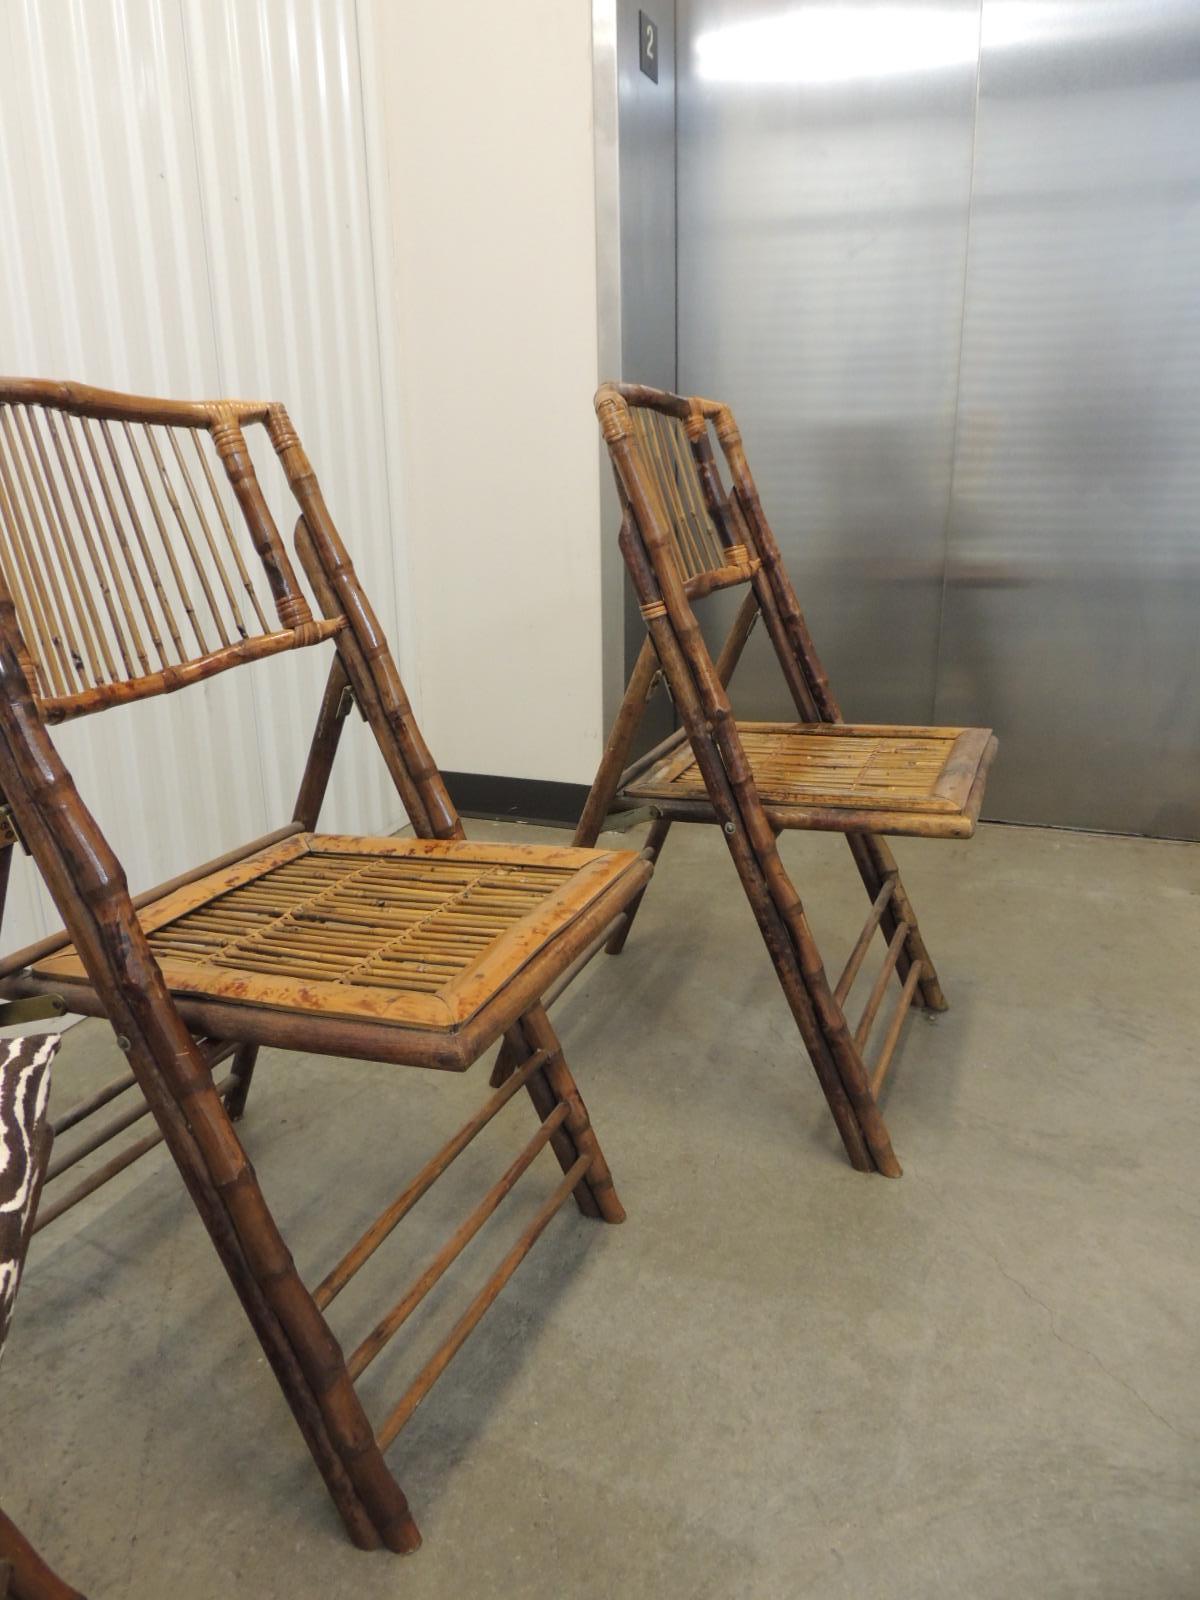 British Colonial Set of '4' Vintage Tortoise Bamboo Folding Chairs with Seat Cushions